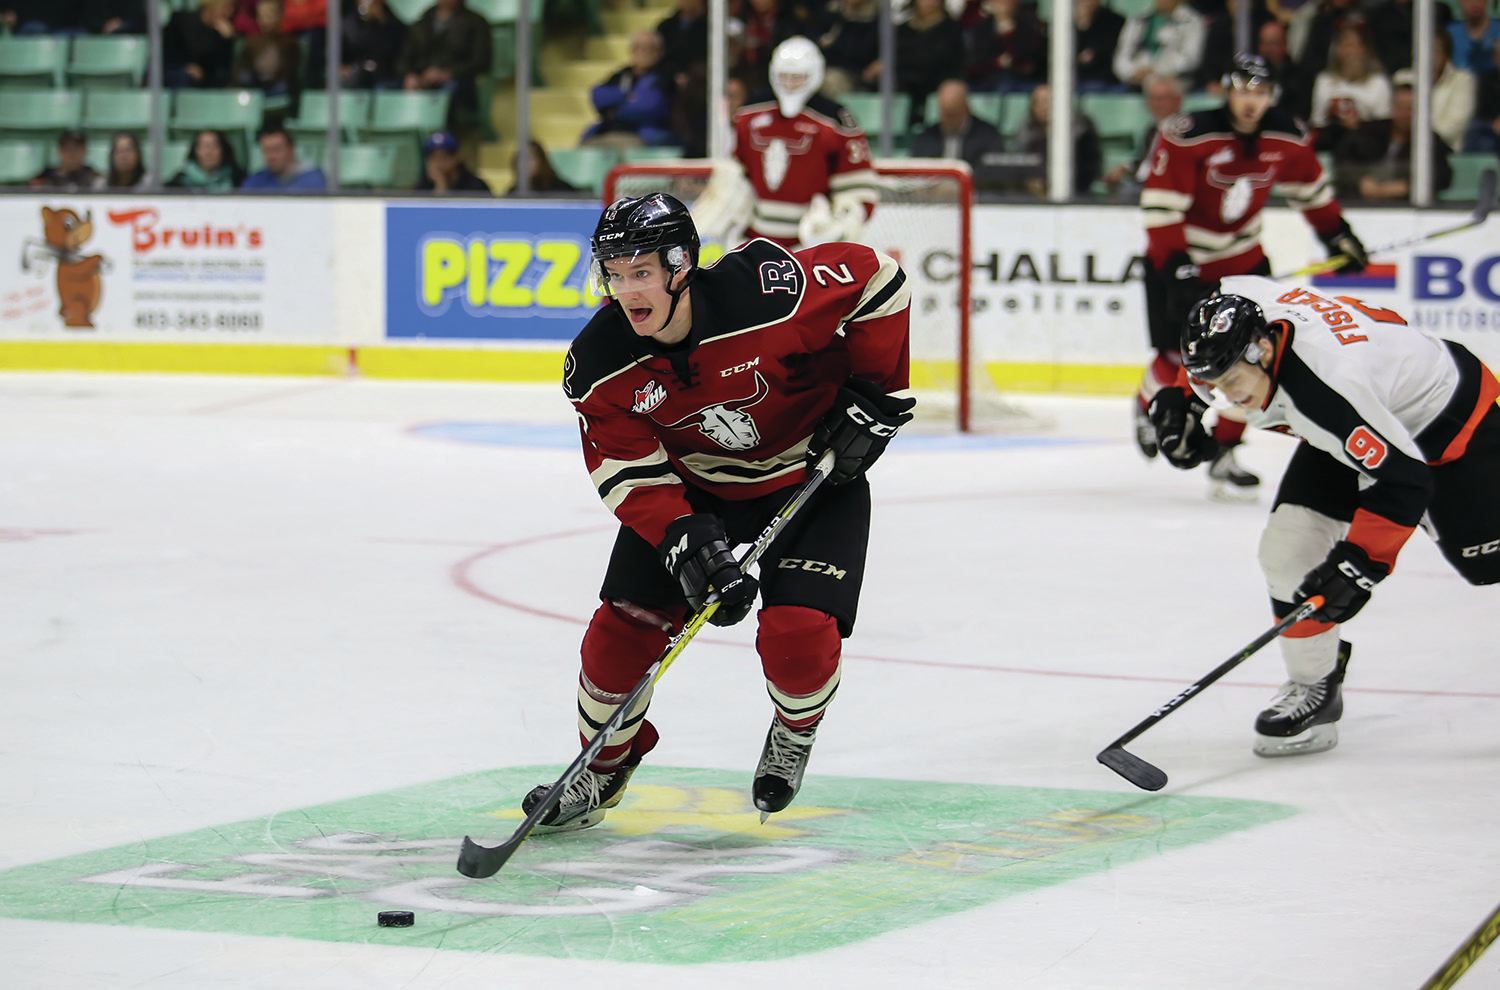 SHUTDOWN - Austin Strand of the Red Deer Rebels carried the puck up the ice during a matchup against the Medicine Hat Tigers earlier this week. Strand has become one of the team’s top defensive defensemen this season.